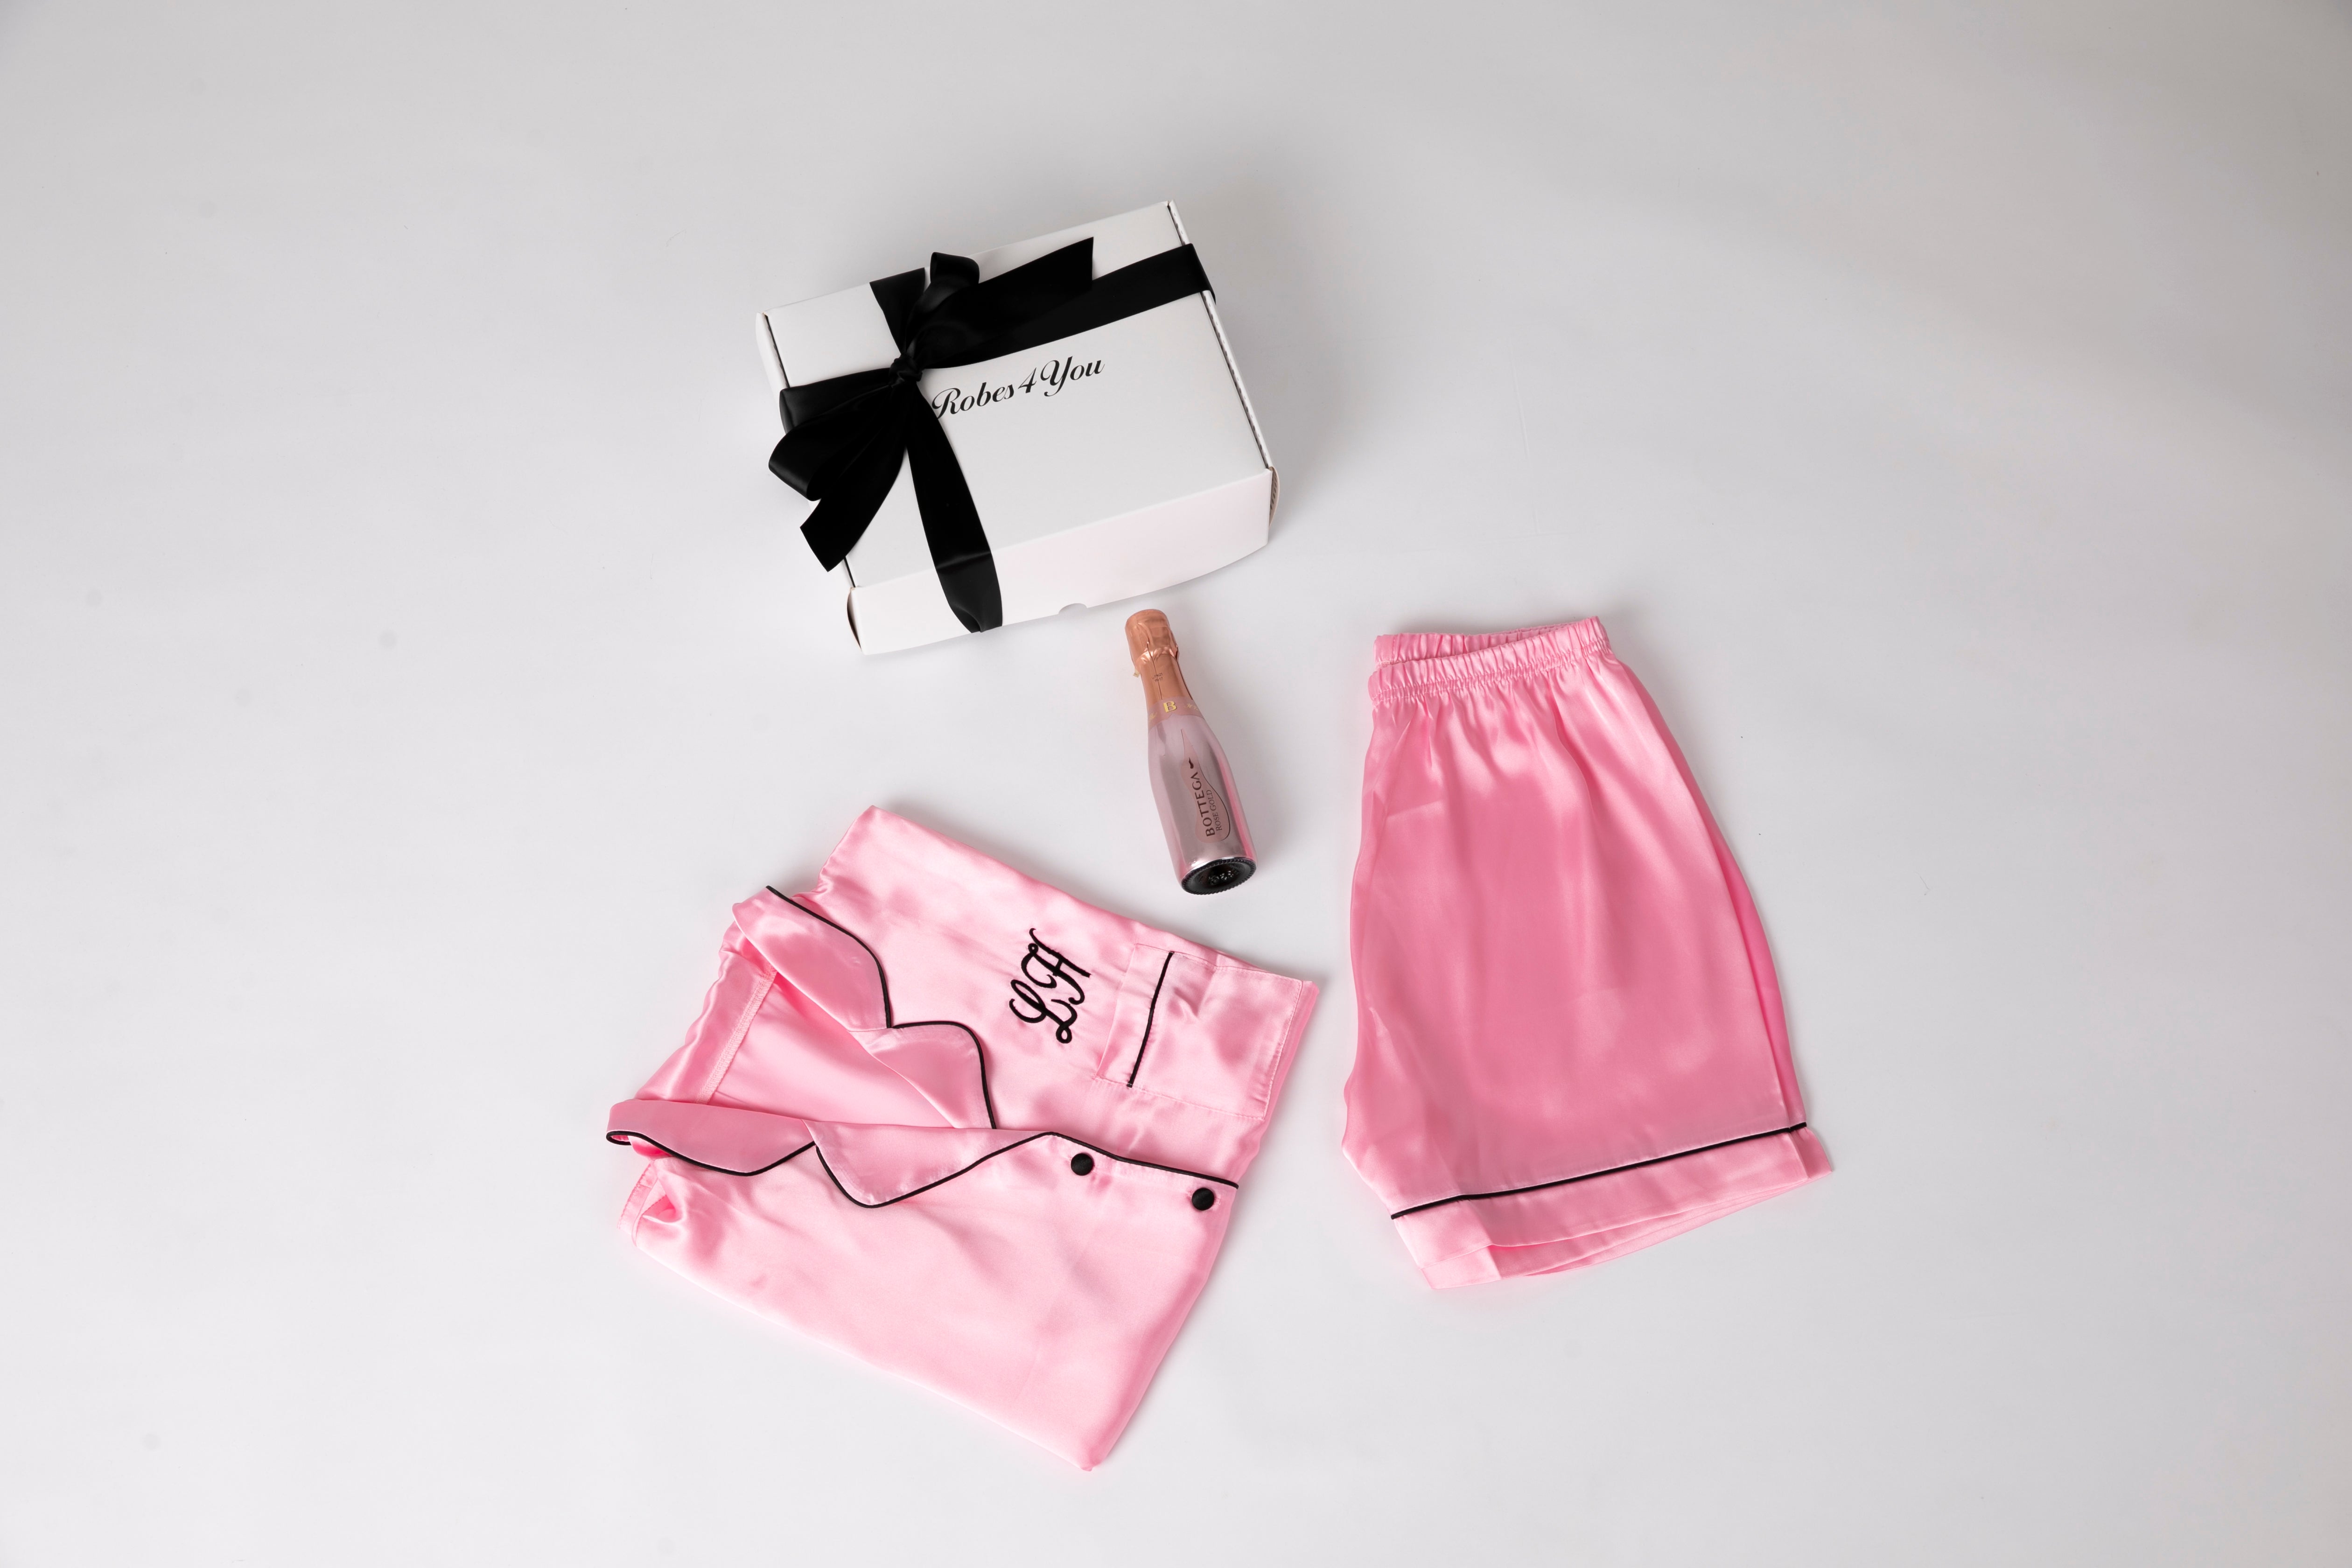 Mini Pjs Hamper- Satin short Pyjamas with Snippet of prosecco presented in a Gift Box with ribbon